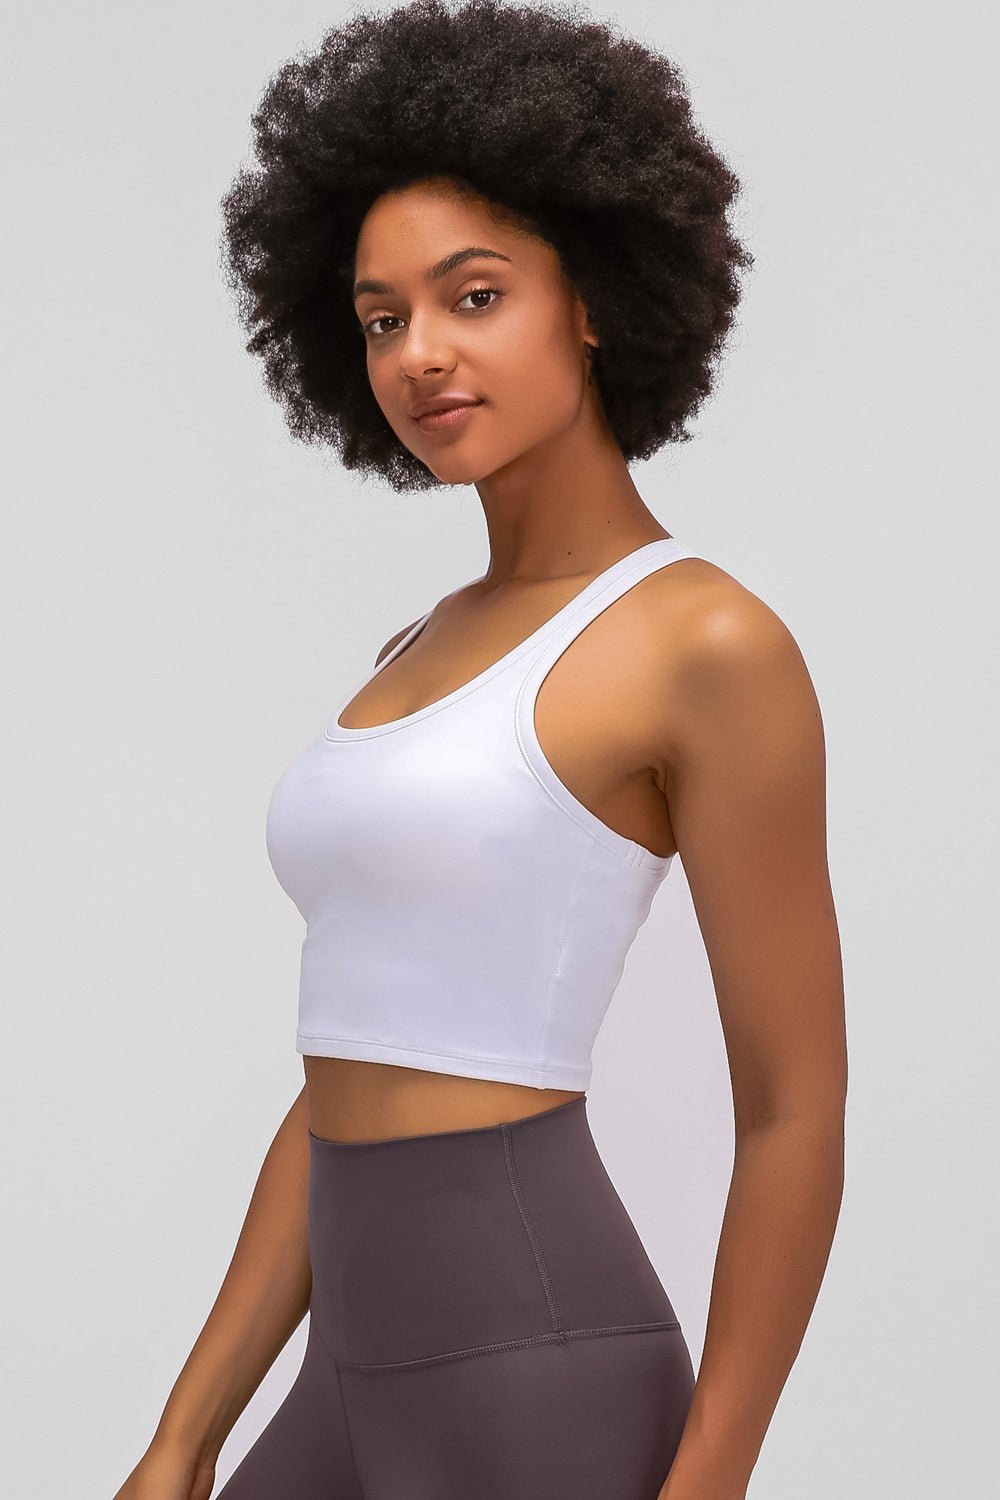 White|SASSYS Shirts & Tops Eclipse Racerback Sports Top